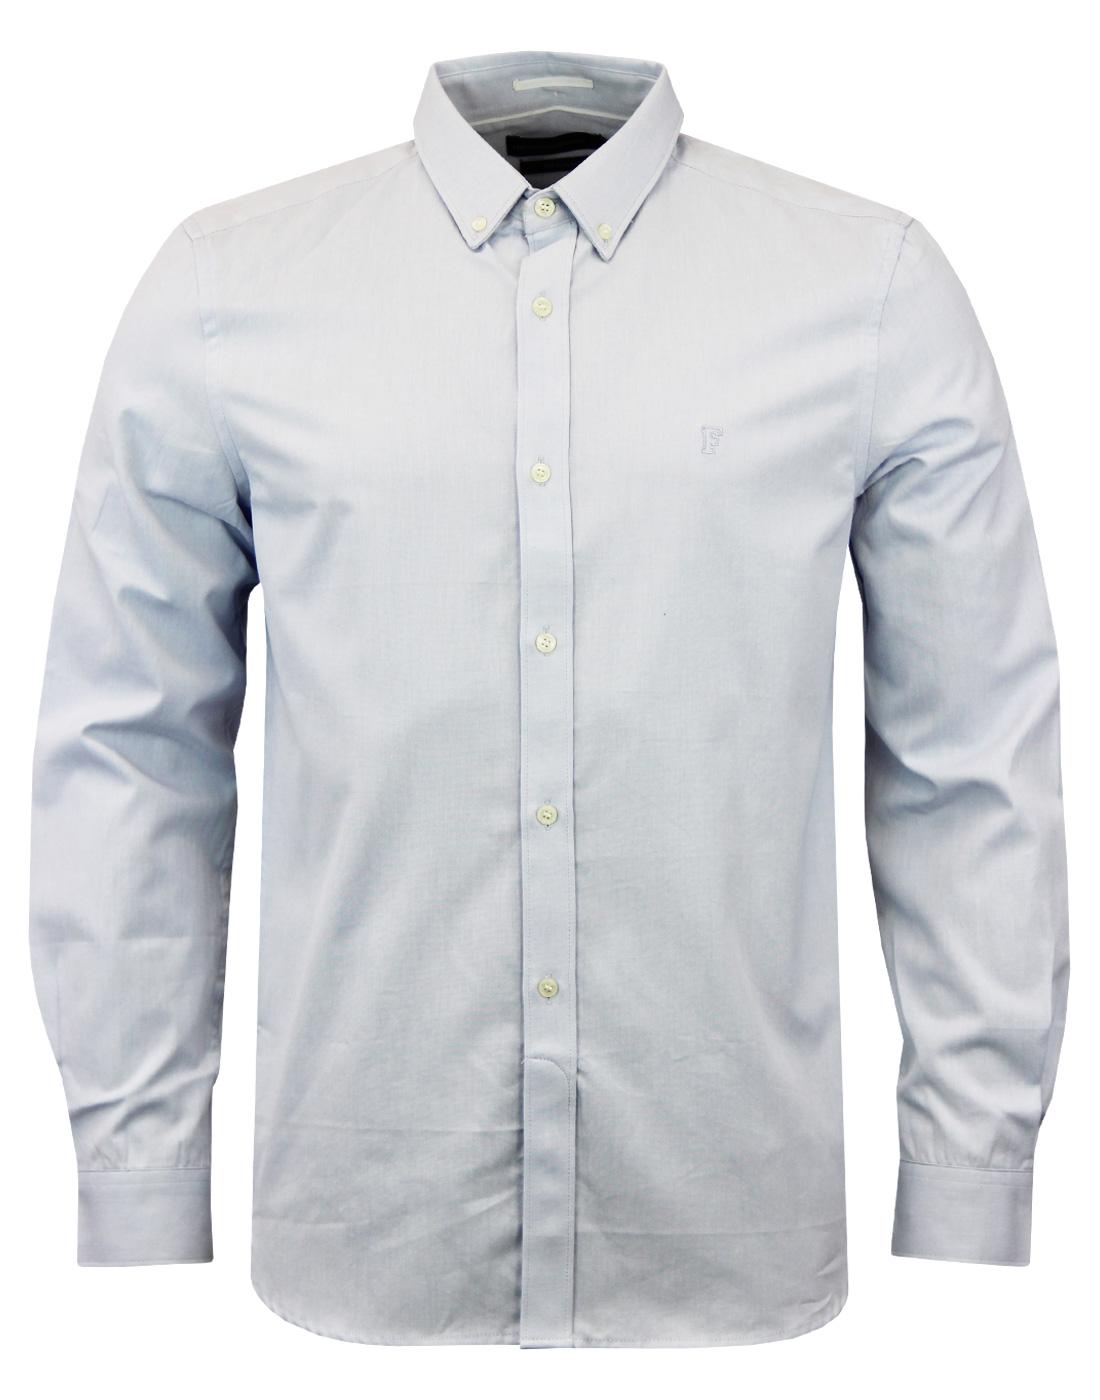 FRENCH CONNECTION Mod Classic Soft Oxford Shirt KB